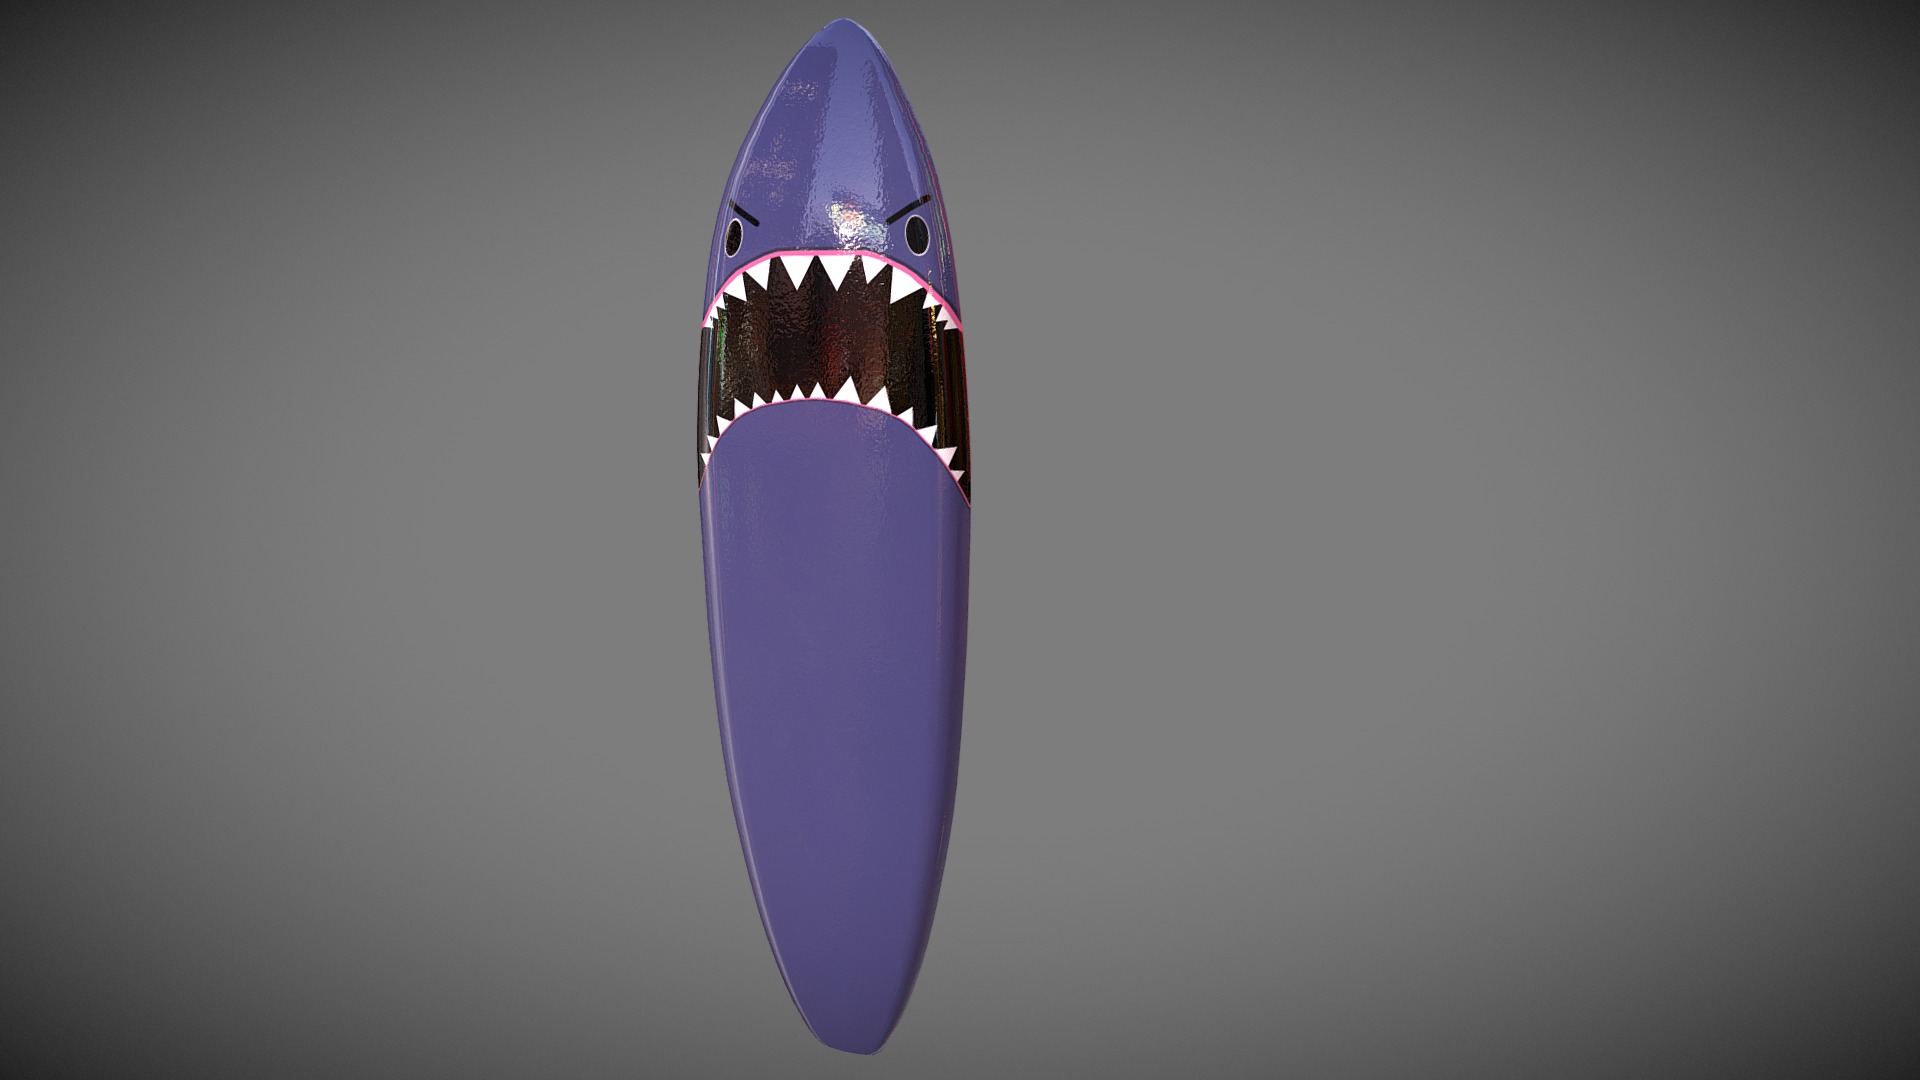 3D model Shark surf table - This is a 3D model of the Shark surf table. The 3D model is about a purple and white object.